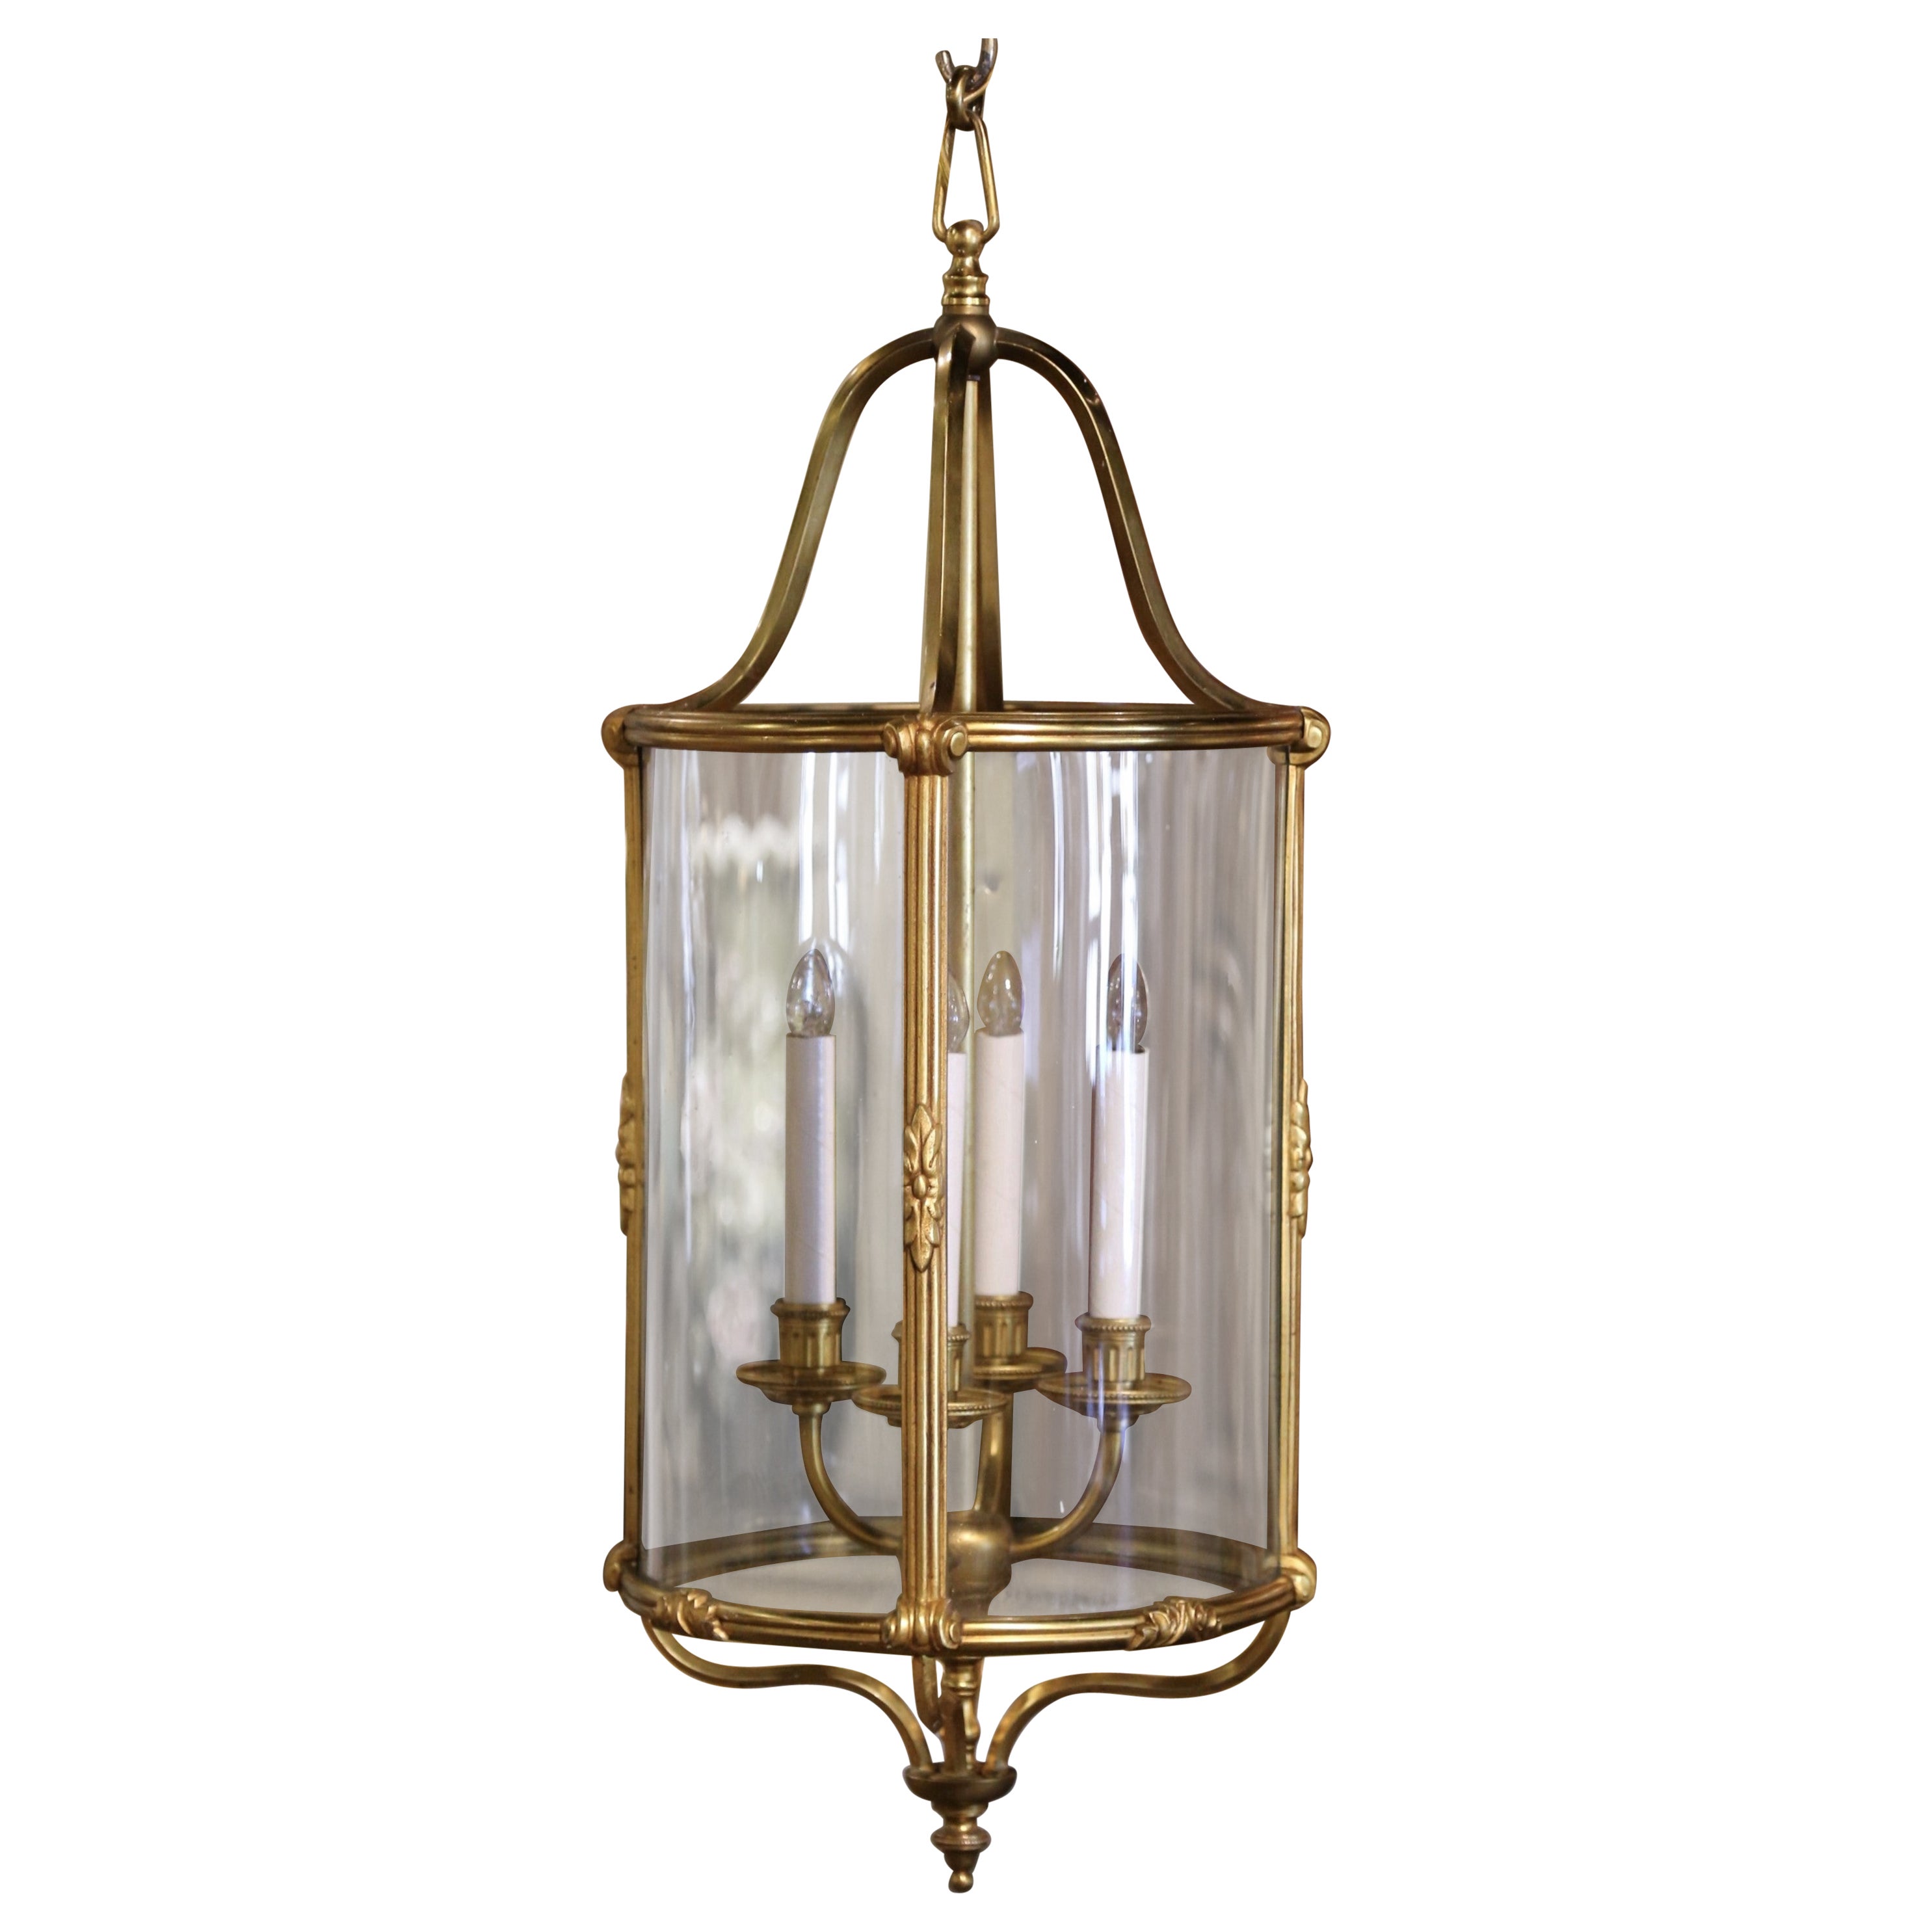  Mid-Century French Napoleon III Bronze and Glass Four-Light Ceiling Lantern  For Sale